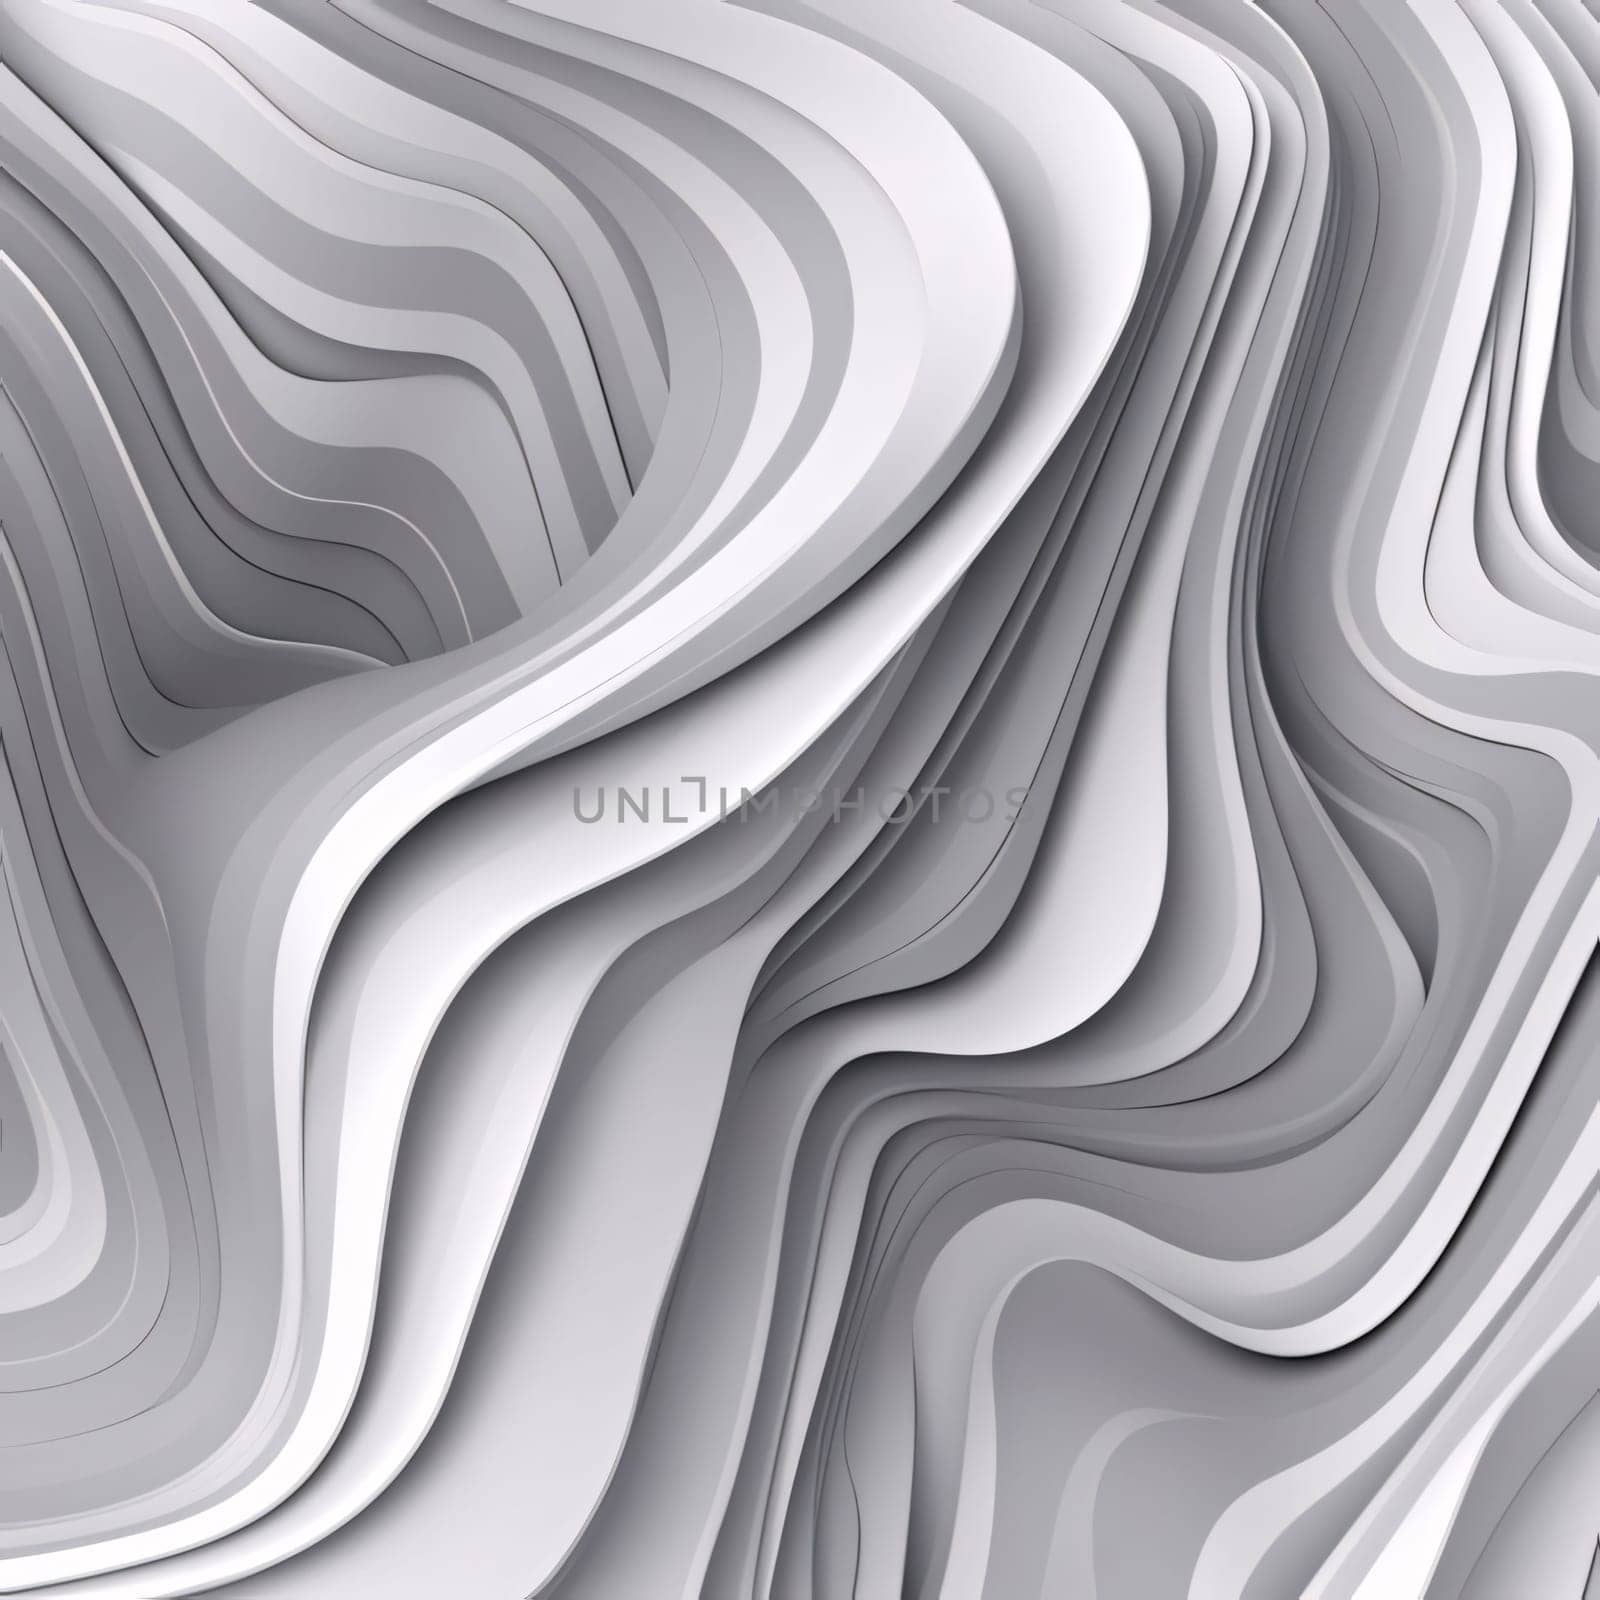 Abstract background design: 3d abstract background with wavy lines in gray and white colors